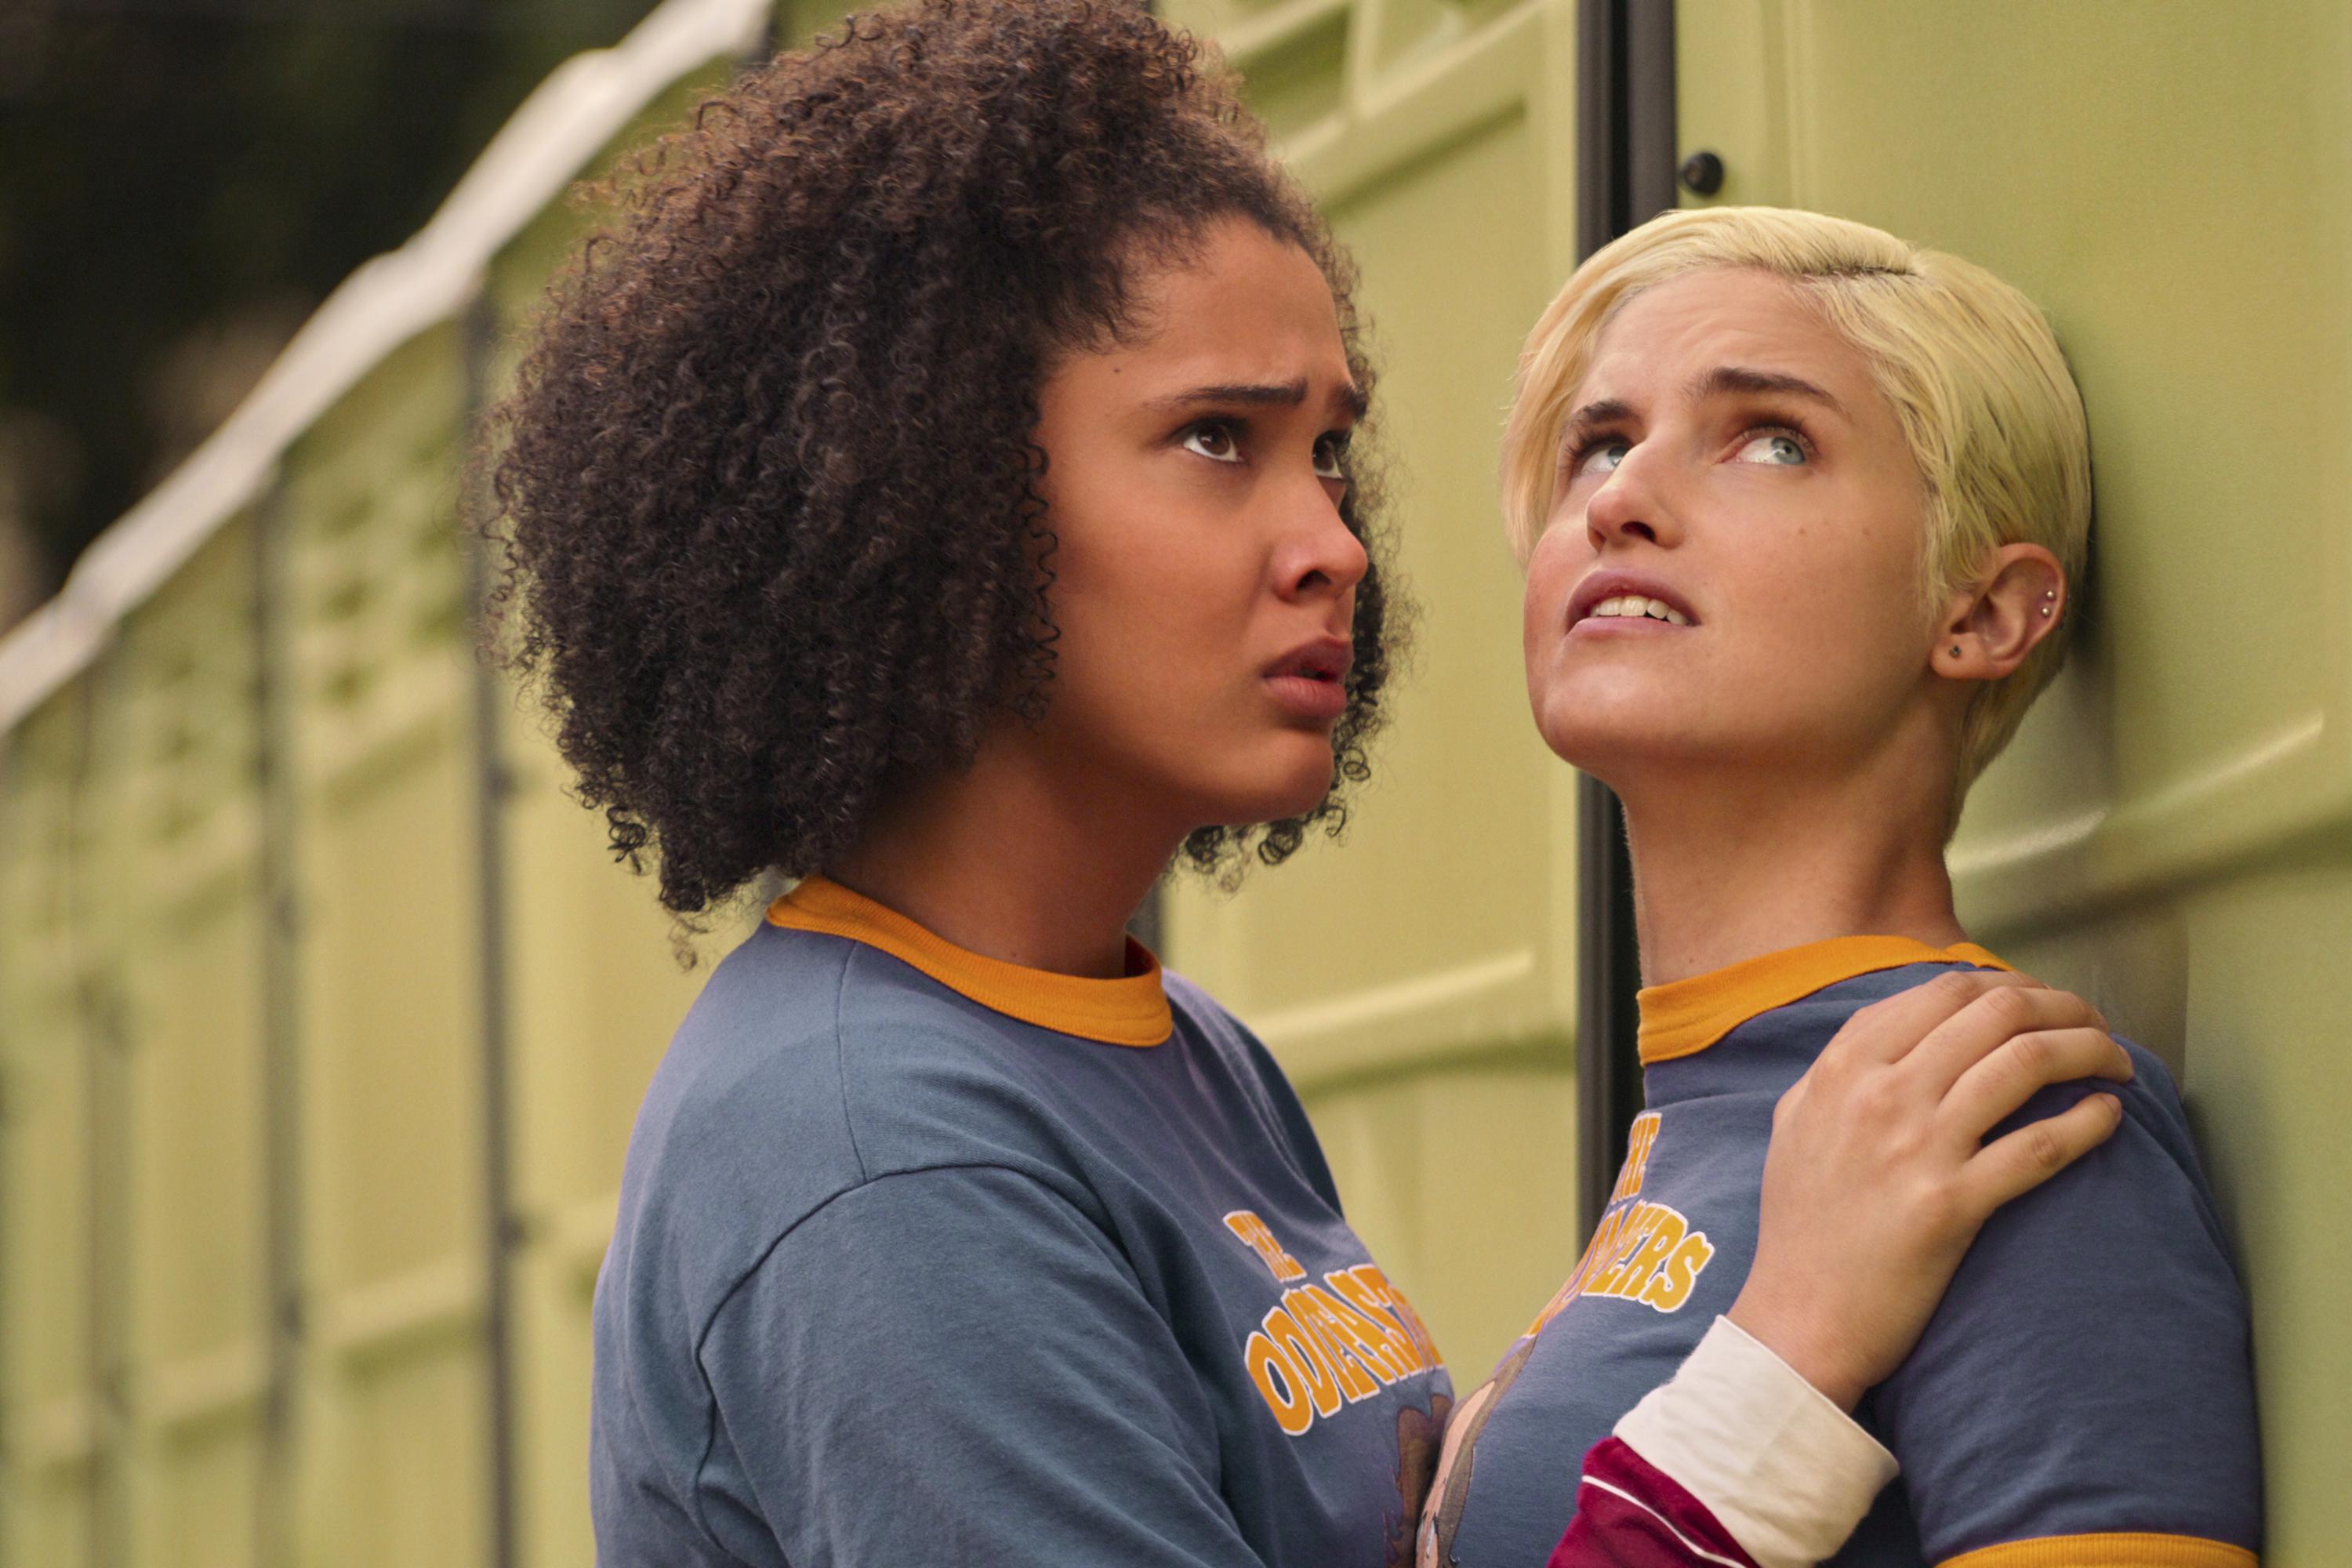 HBO Max Lesbian TV: The Best LGBTQ+ Streaming Shows